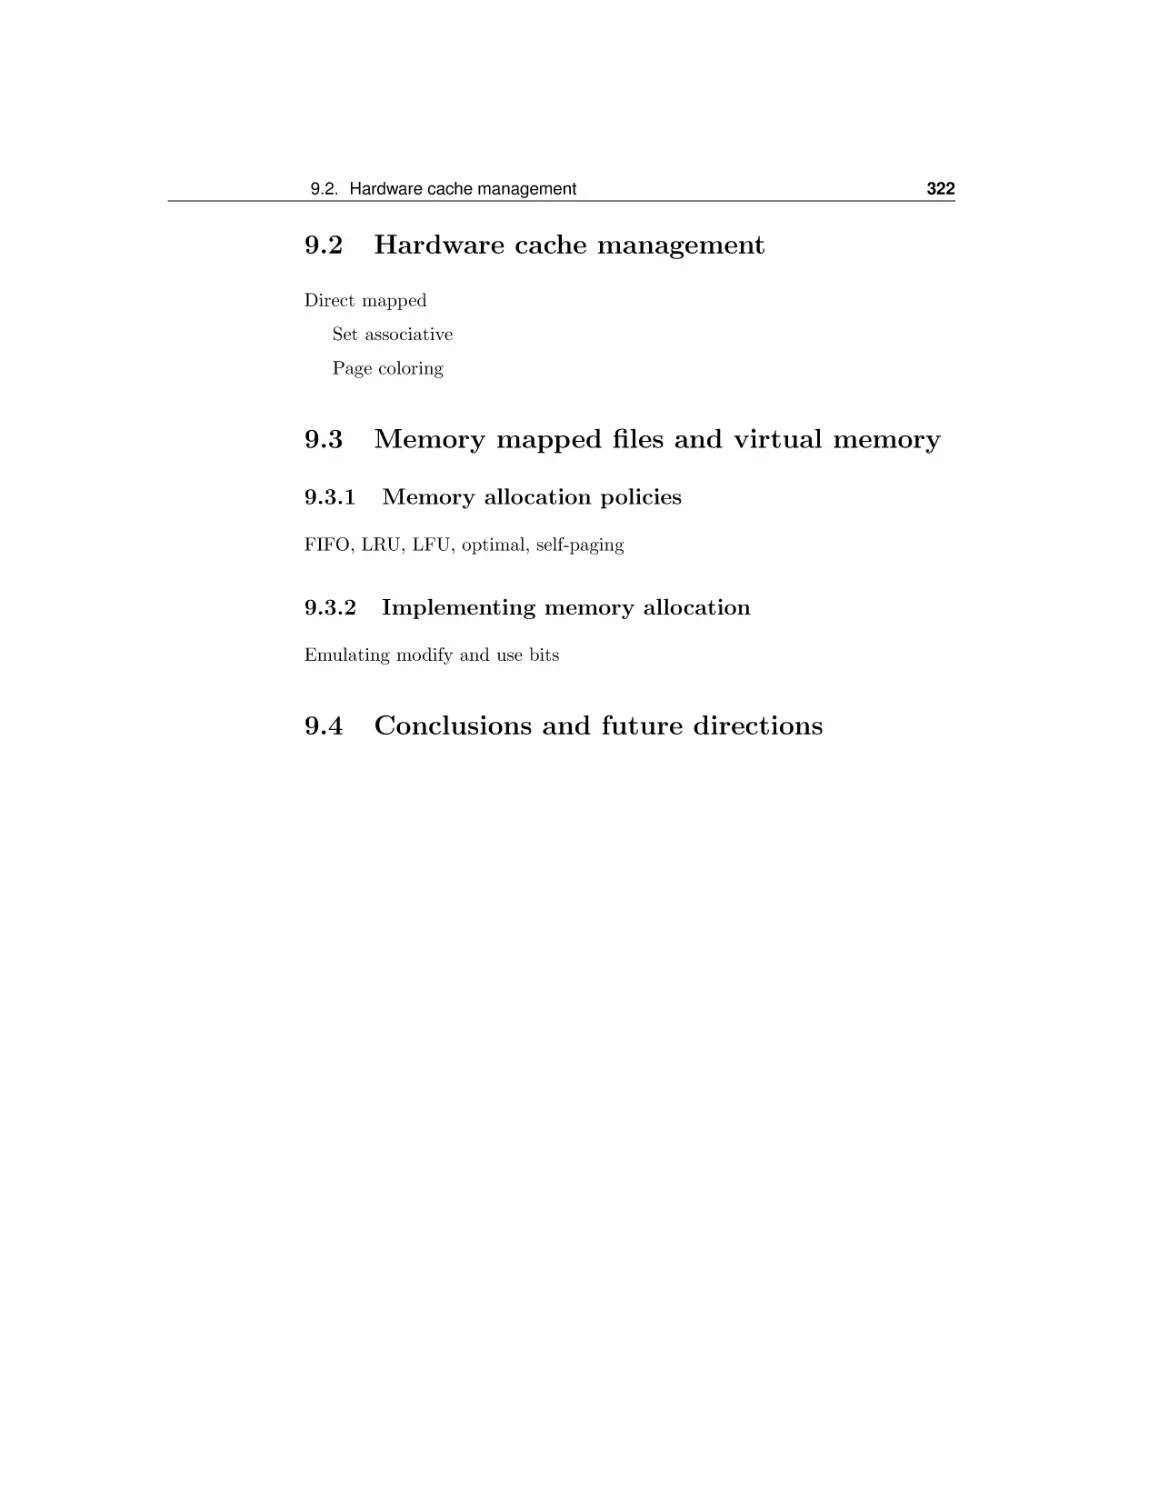 Hardware cache management
Memory mapped files and virtual memory
Conclusions and future directions